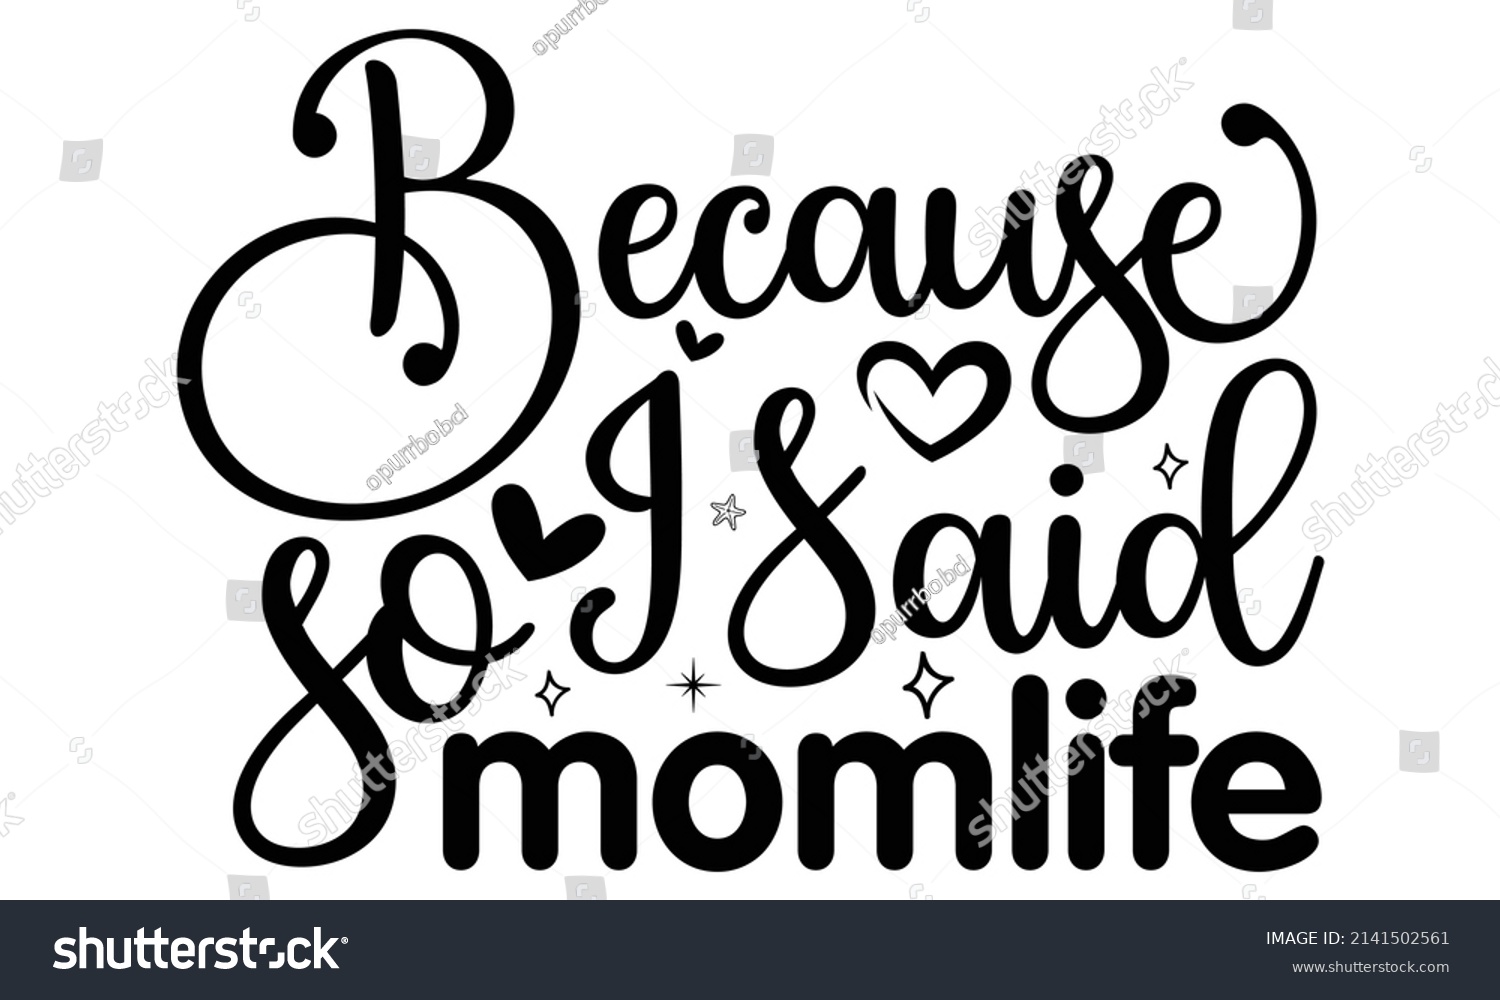 SVG of Because I said so  momlife- Mother's day t-shirt design, Hand drawn lettering phrase, Calligraphy t-shirt design, Isolated on white background, Handwritten vector sign, SVG, EPS 10 svg